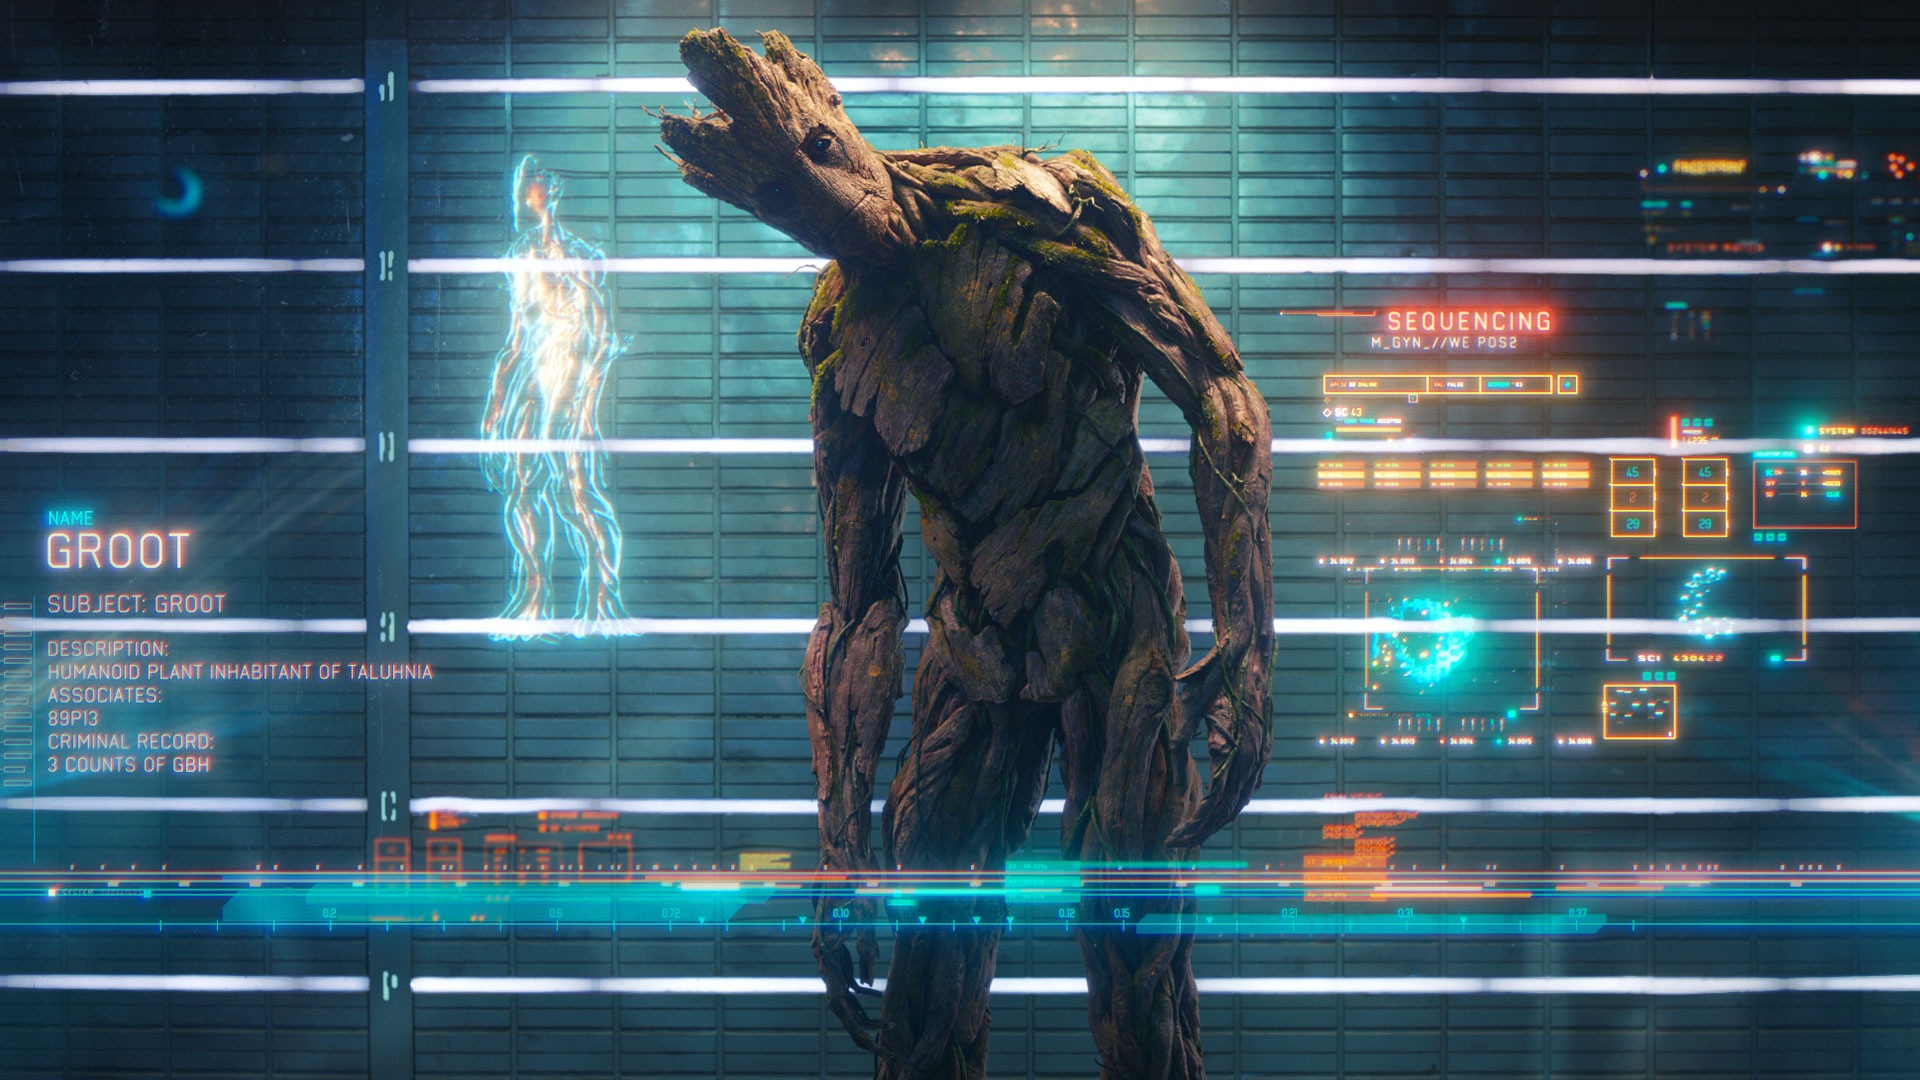 Guardians of the Galaxy 2014 HD movie wallpapers #8 - 1920x1080